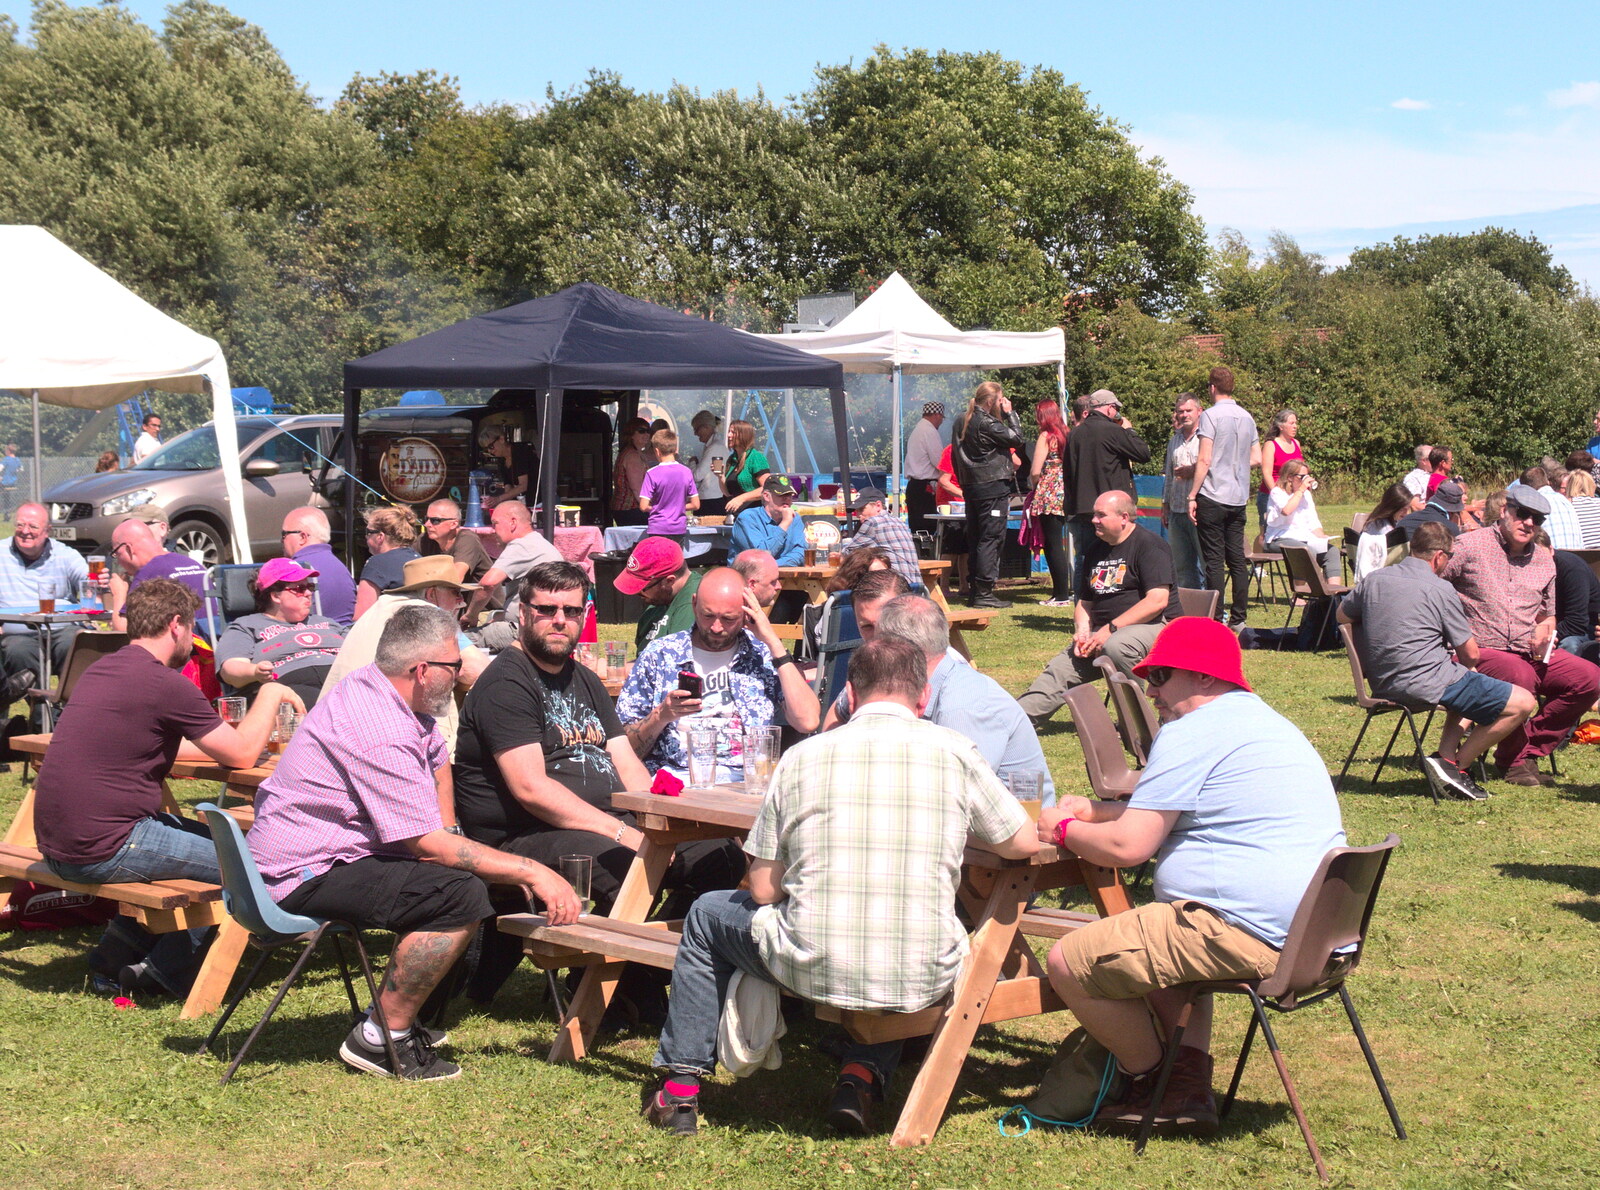 The festival fills up towards the afternoon from The Humpty Dumpty Beer Festival, Reedham, Norfolk - 22nd July 2017